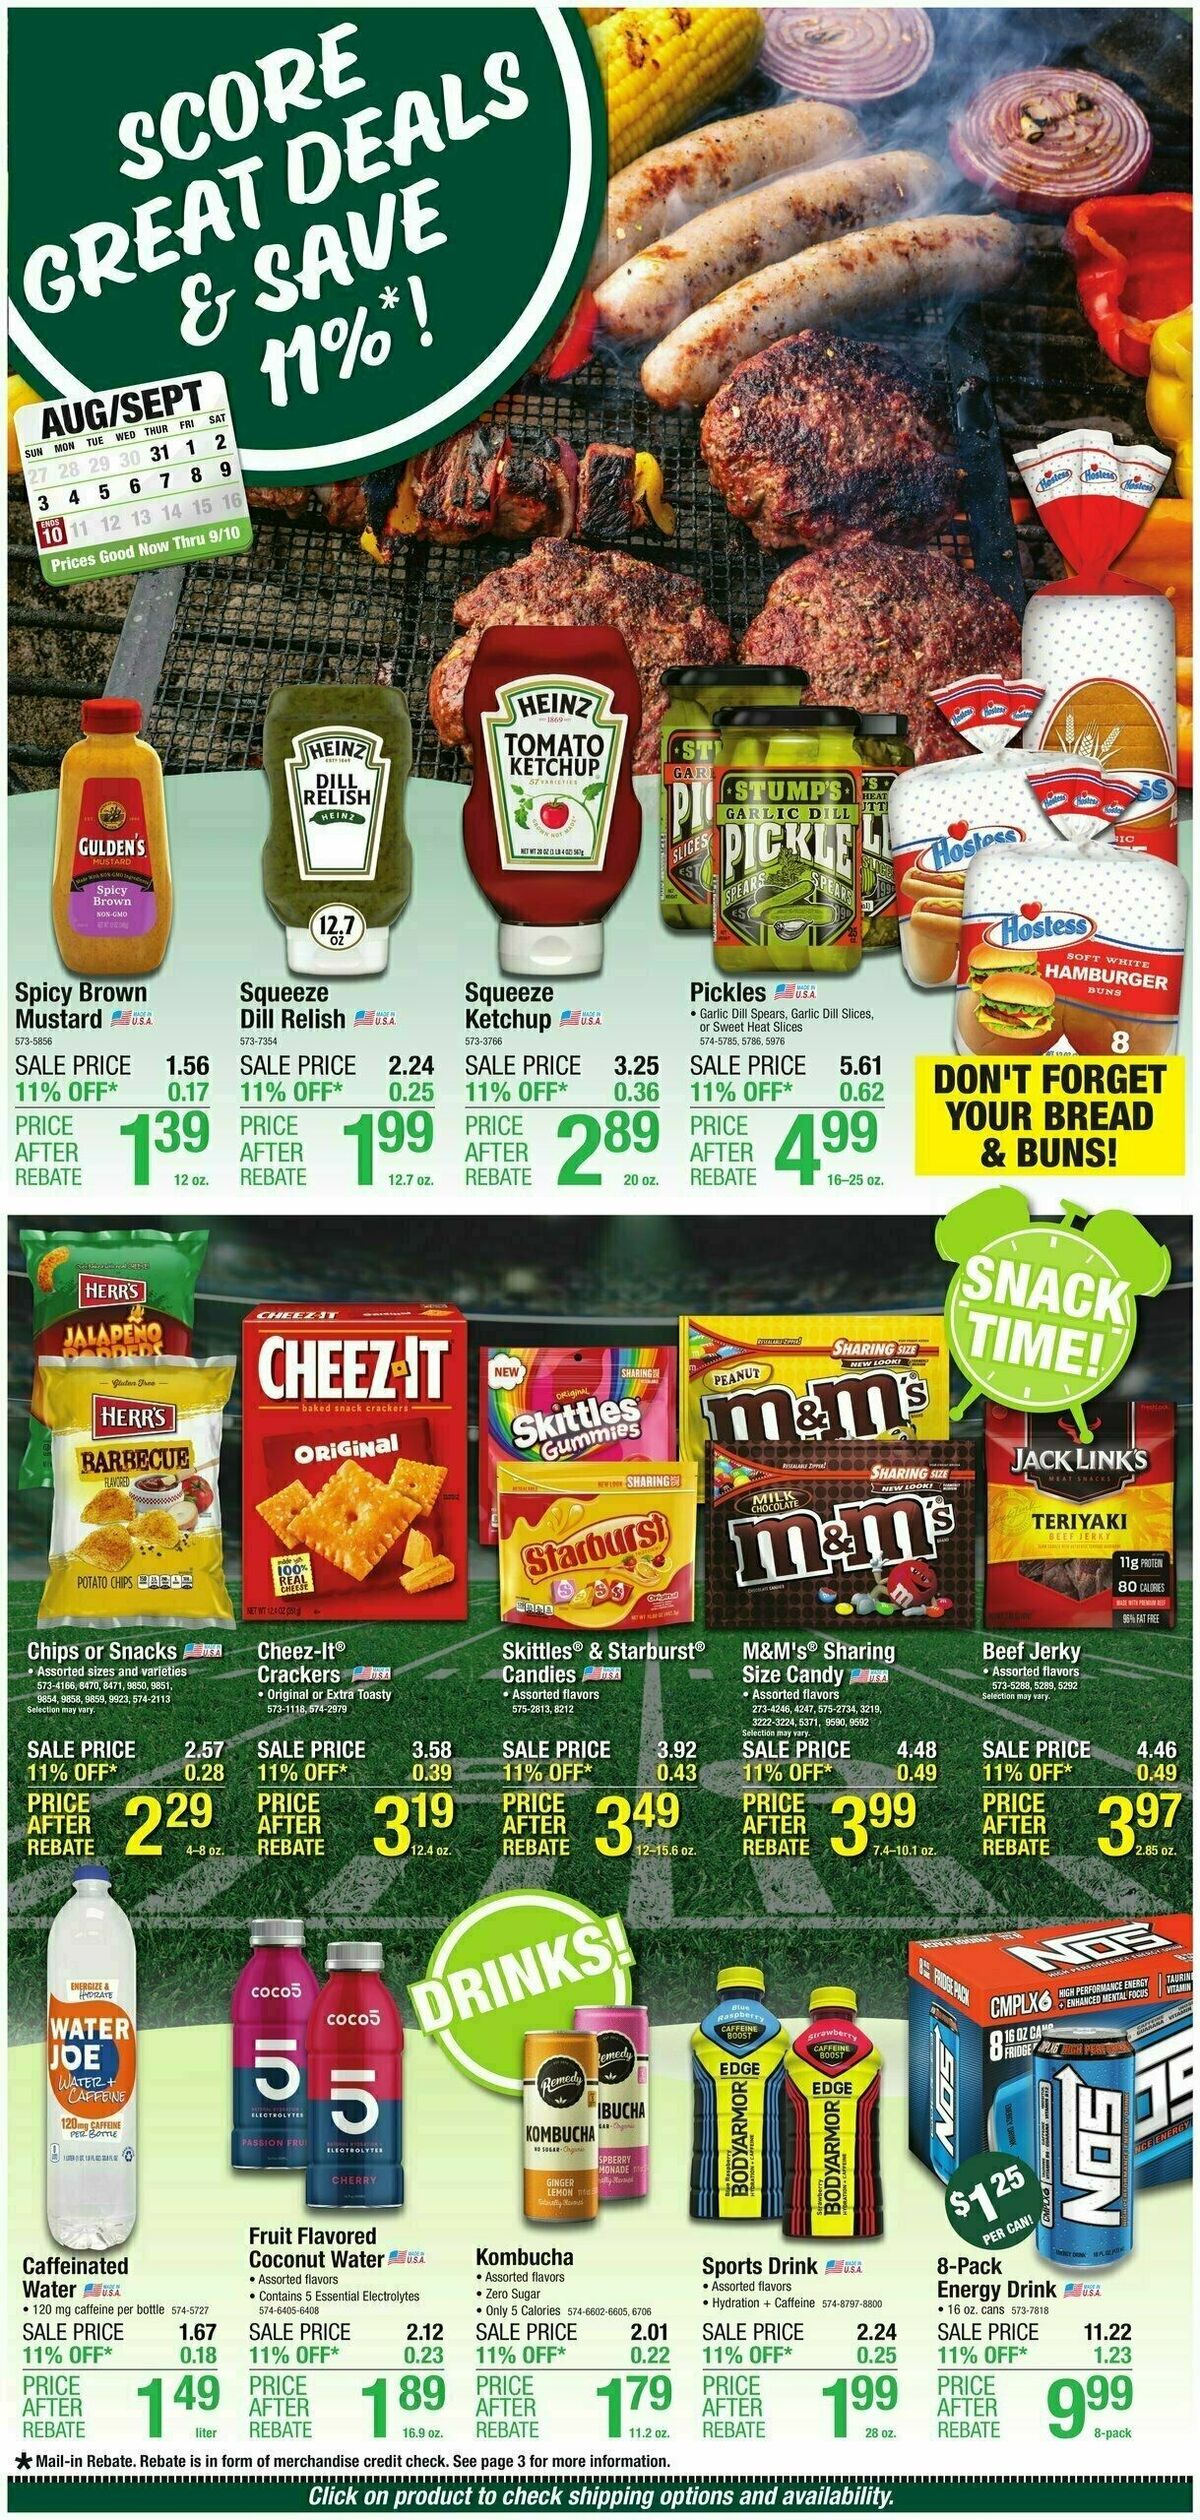 Menards Home Essentials Weekly Ad from August 30